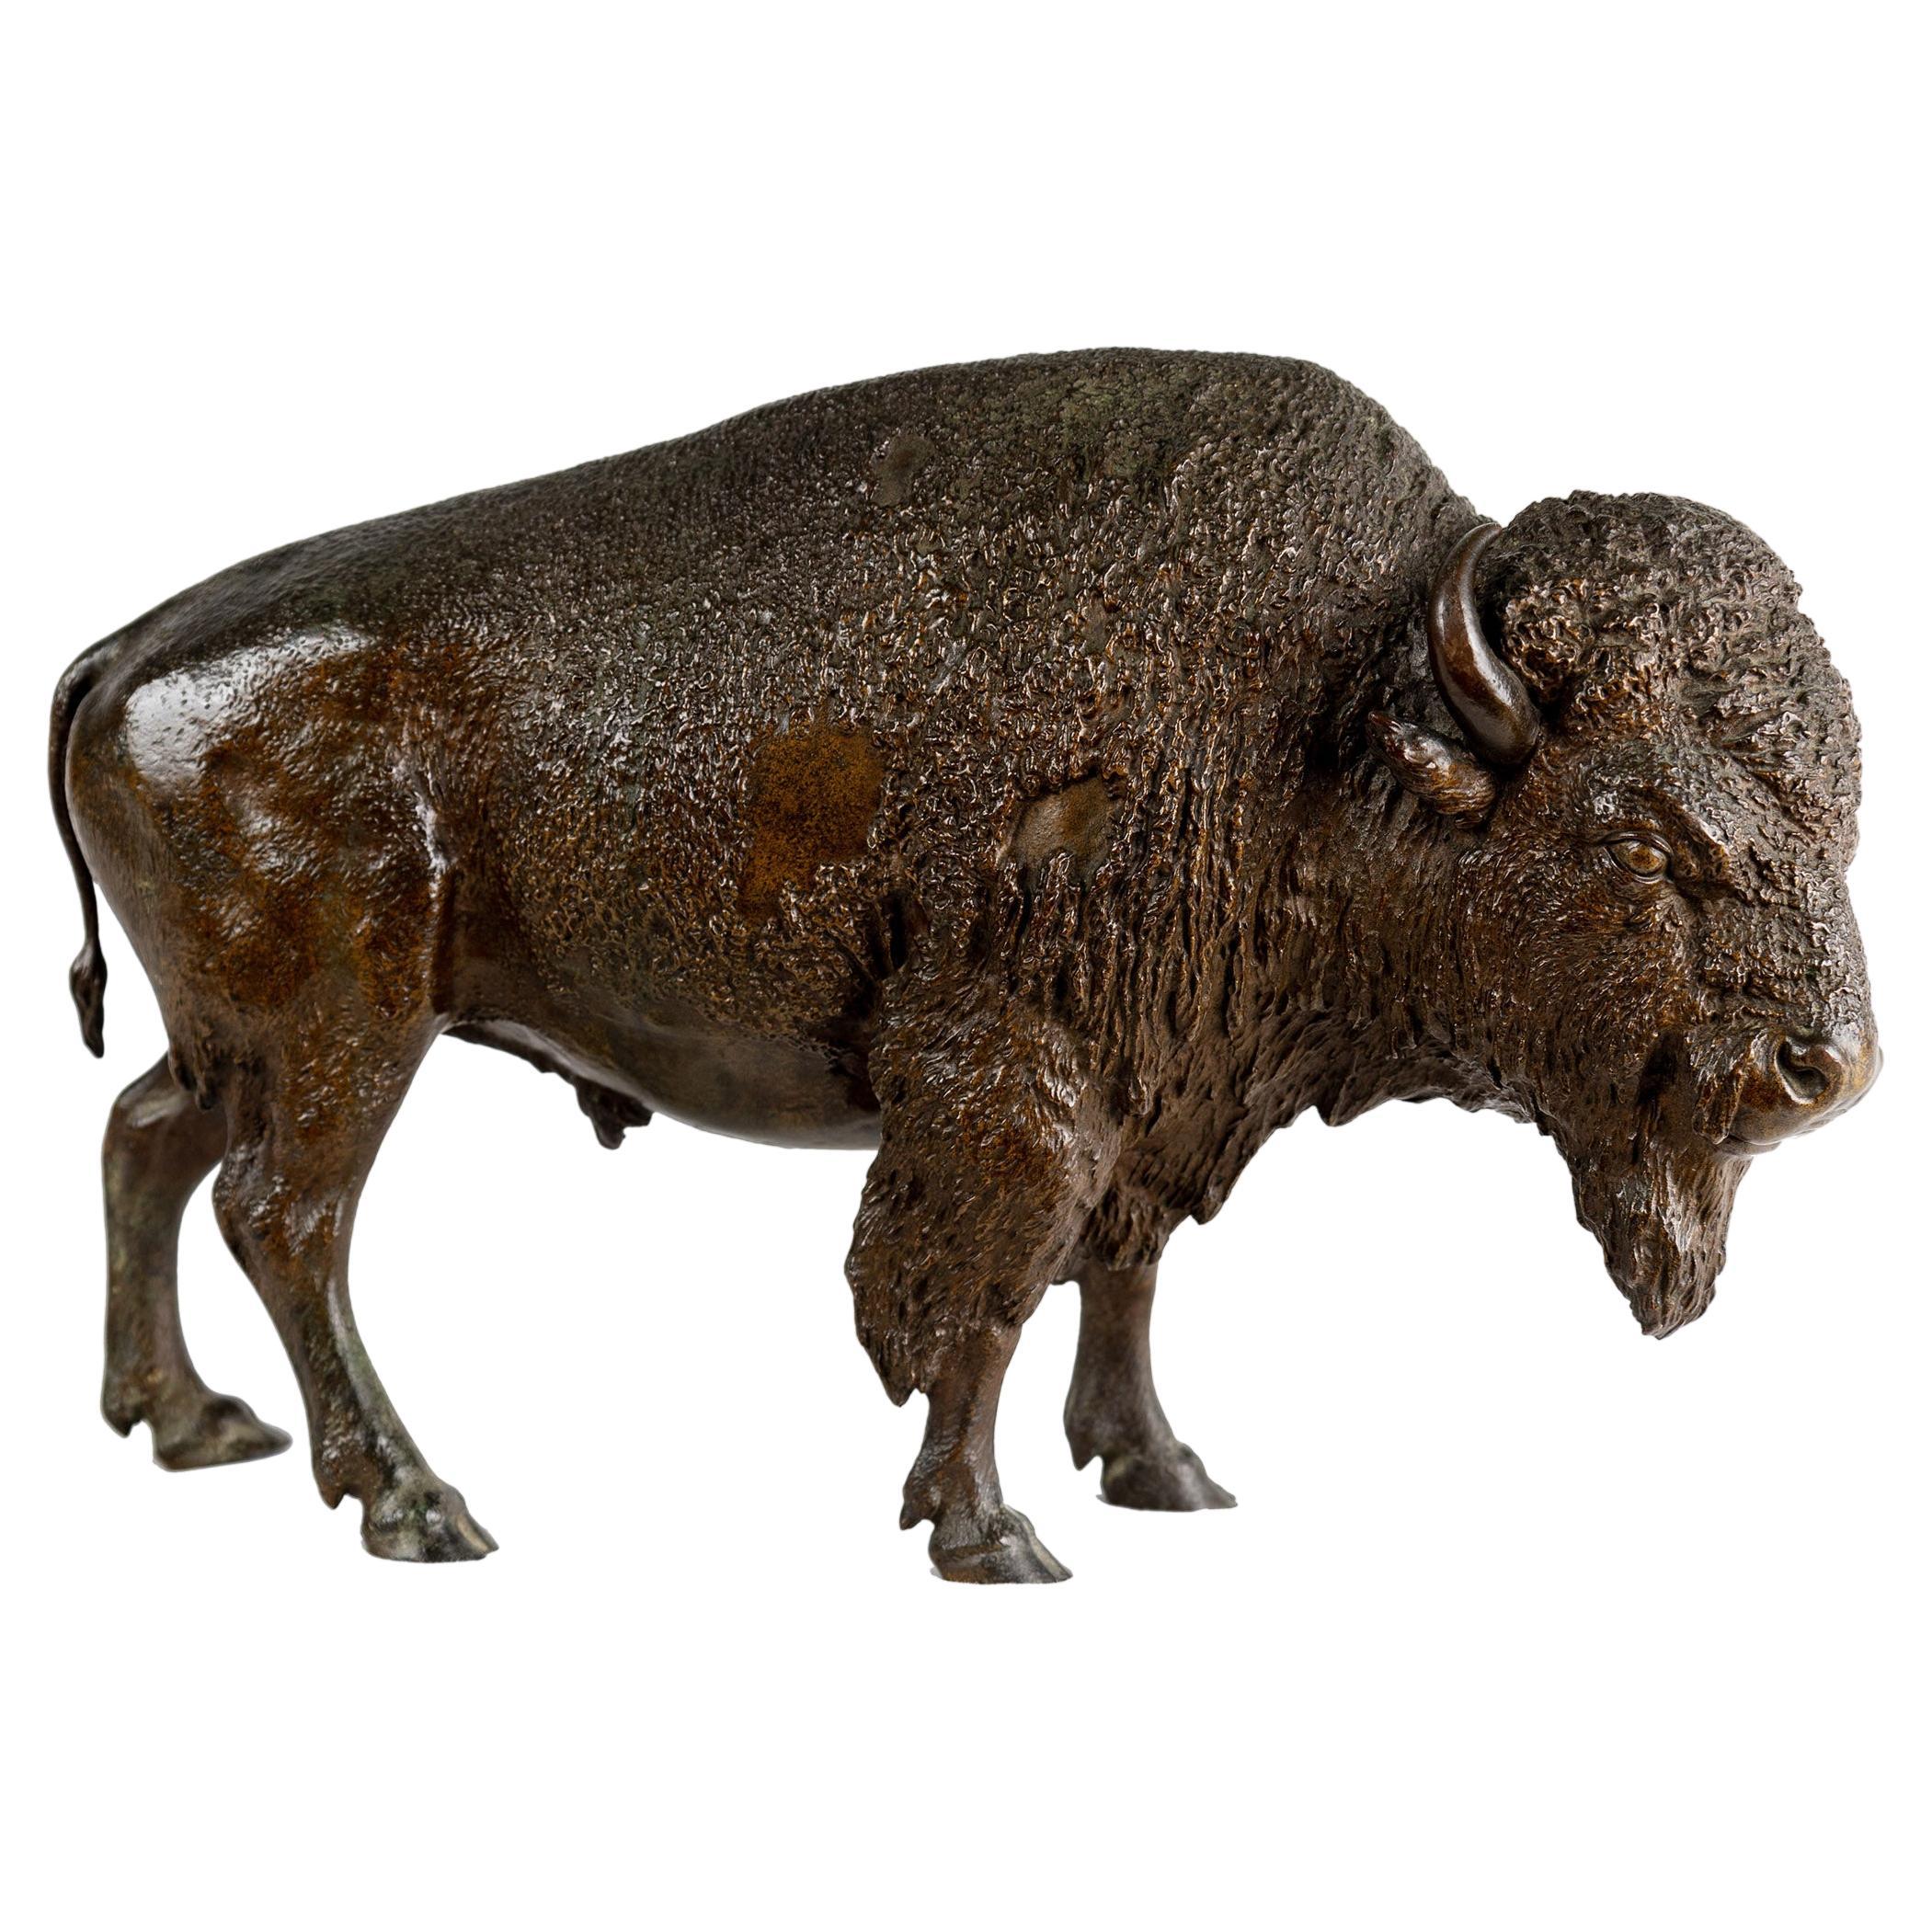 A Rare And Remarkable Bronze American Bison, Circa 1885 By Franz Bergmann